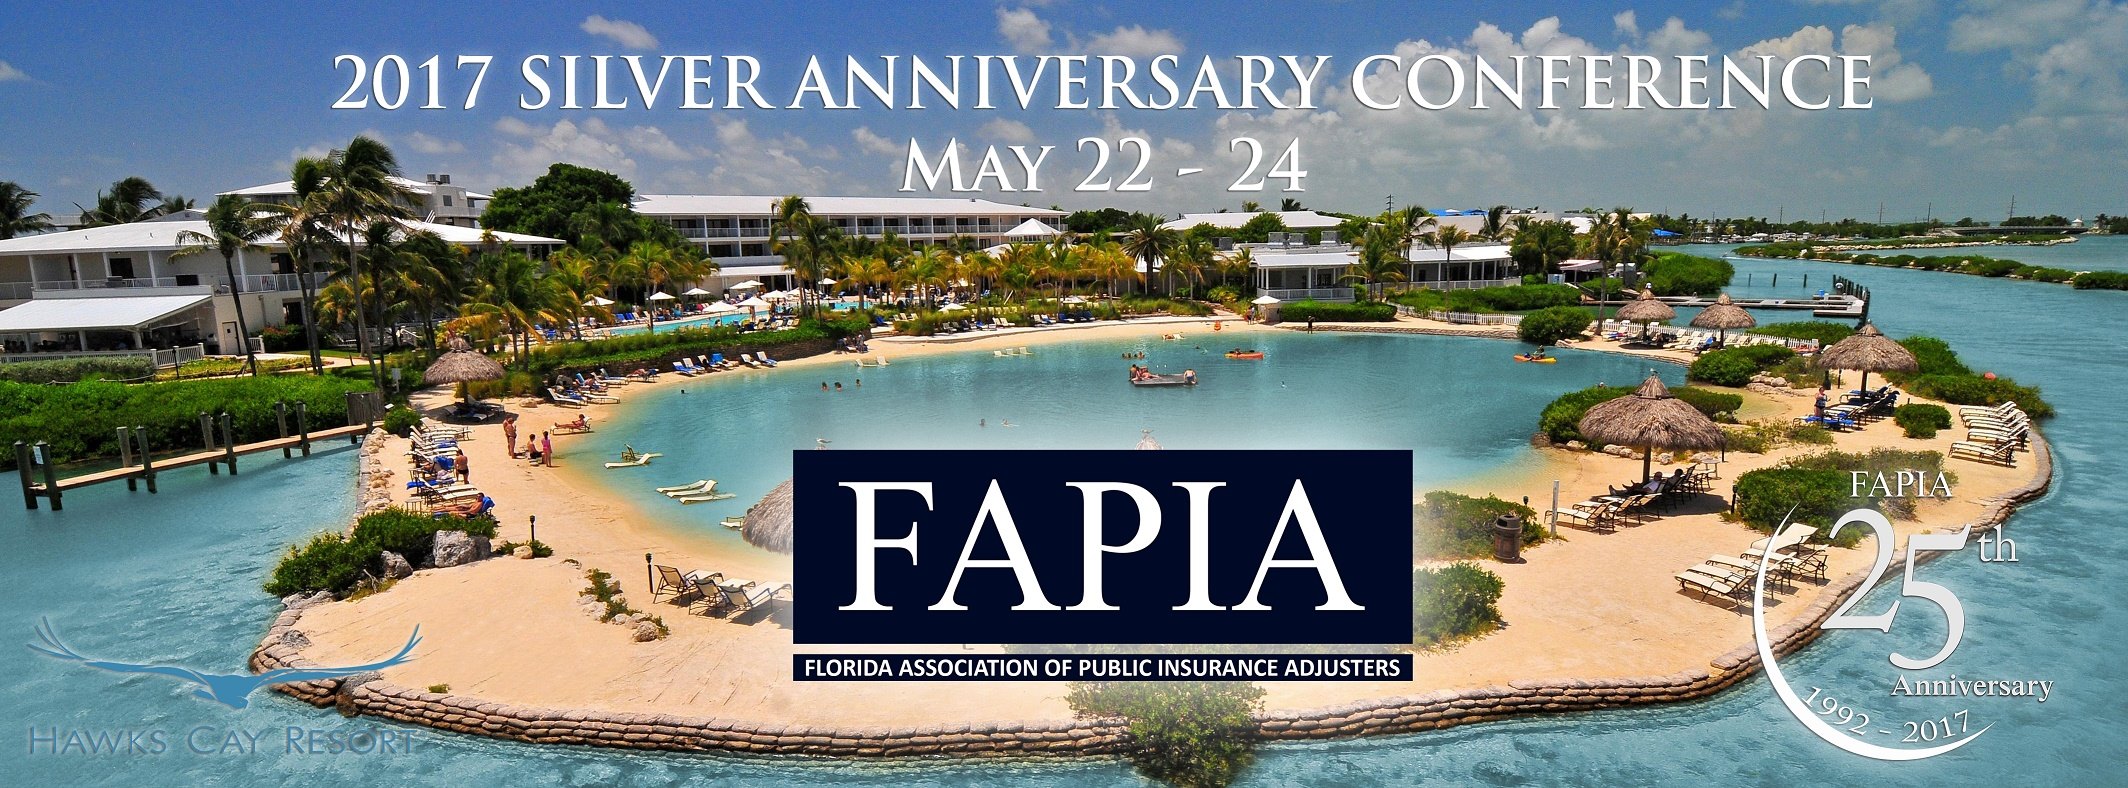 Venture Construction Group of Florida Sponsors FAPIA Conference